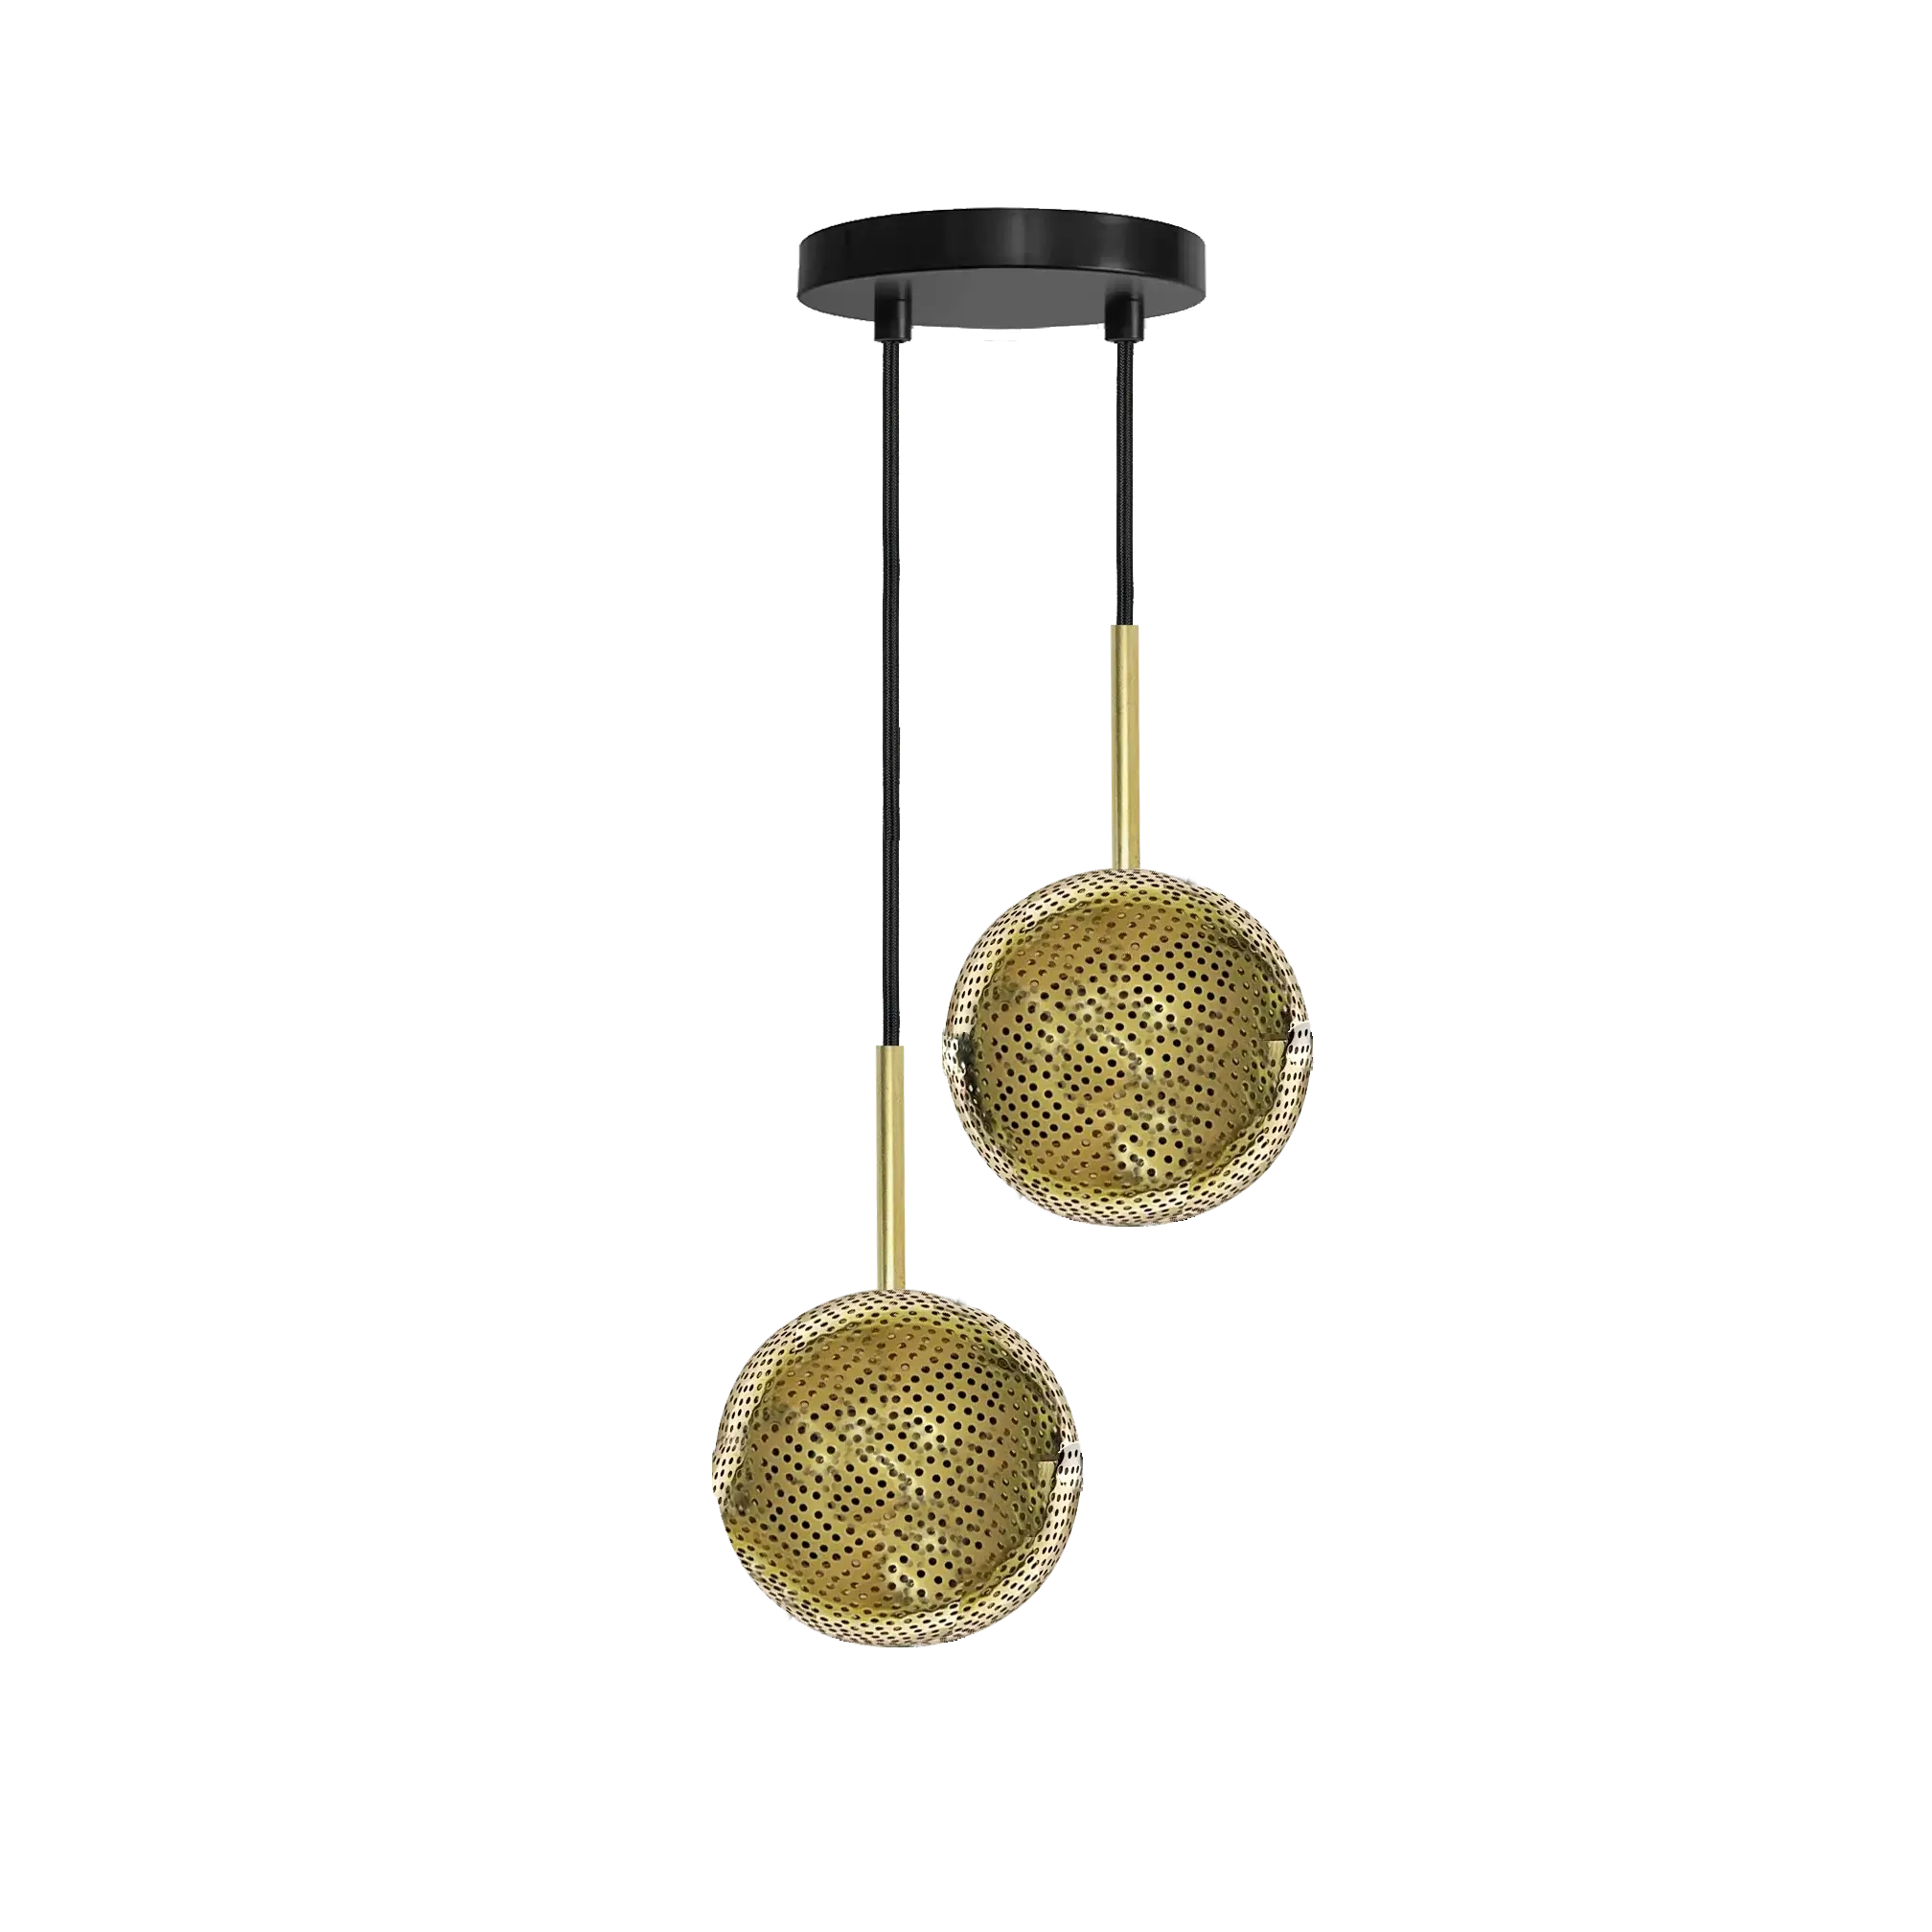 Dounia home Chandelier in Polished brass made of metal, Model: Kora 2